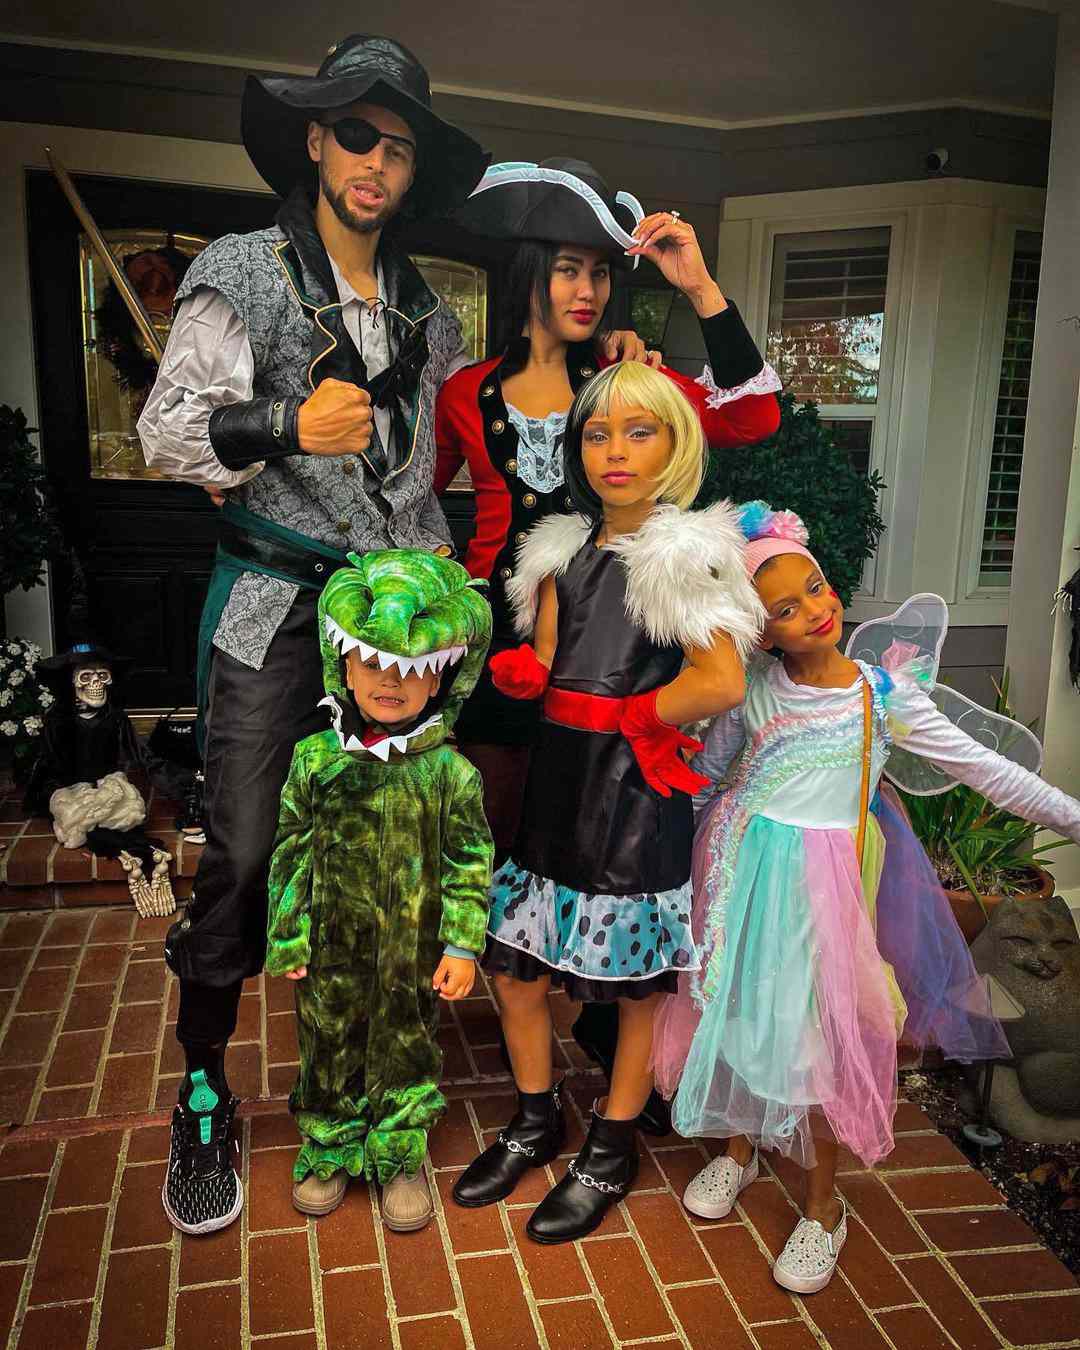 likhoa unconventional halloween costume ideas from stephen curry s family and their adorable kids for 6538cffe7b3d0 Unconventional Halloween Costume Ideas From Stephen Curry's Family And Their Adorable Kids For 2023